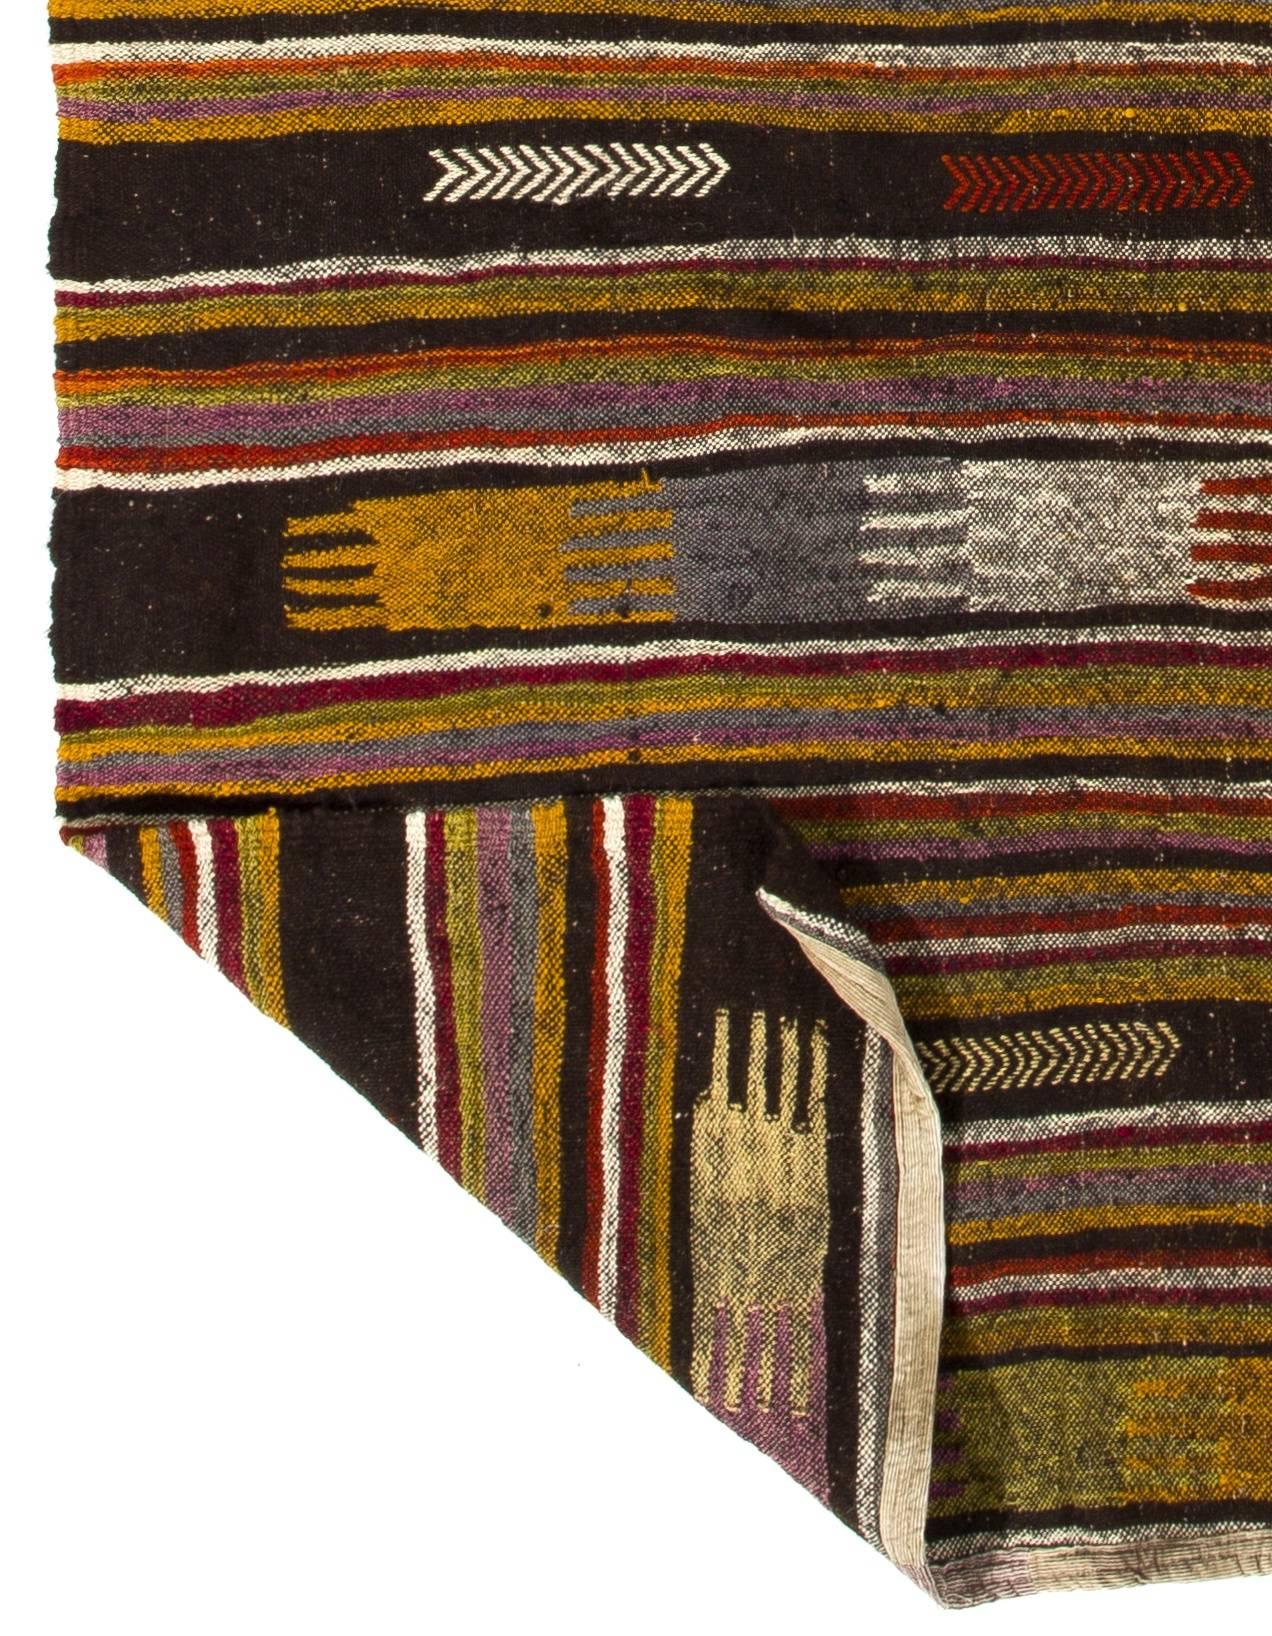 Vintage flat-weave (kilim) with striped design, 100% wool. Handwoven in Turkey in 1960s.
Washed professionally. Sturdy and suitable for both residential and commercial interiors.
Measures: 5.8 x 9 Ft
We can modify the dimensions and make it shorter